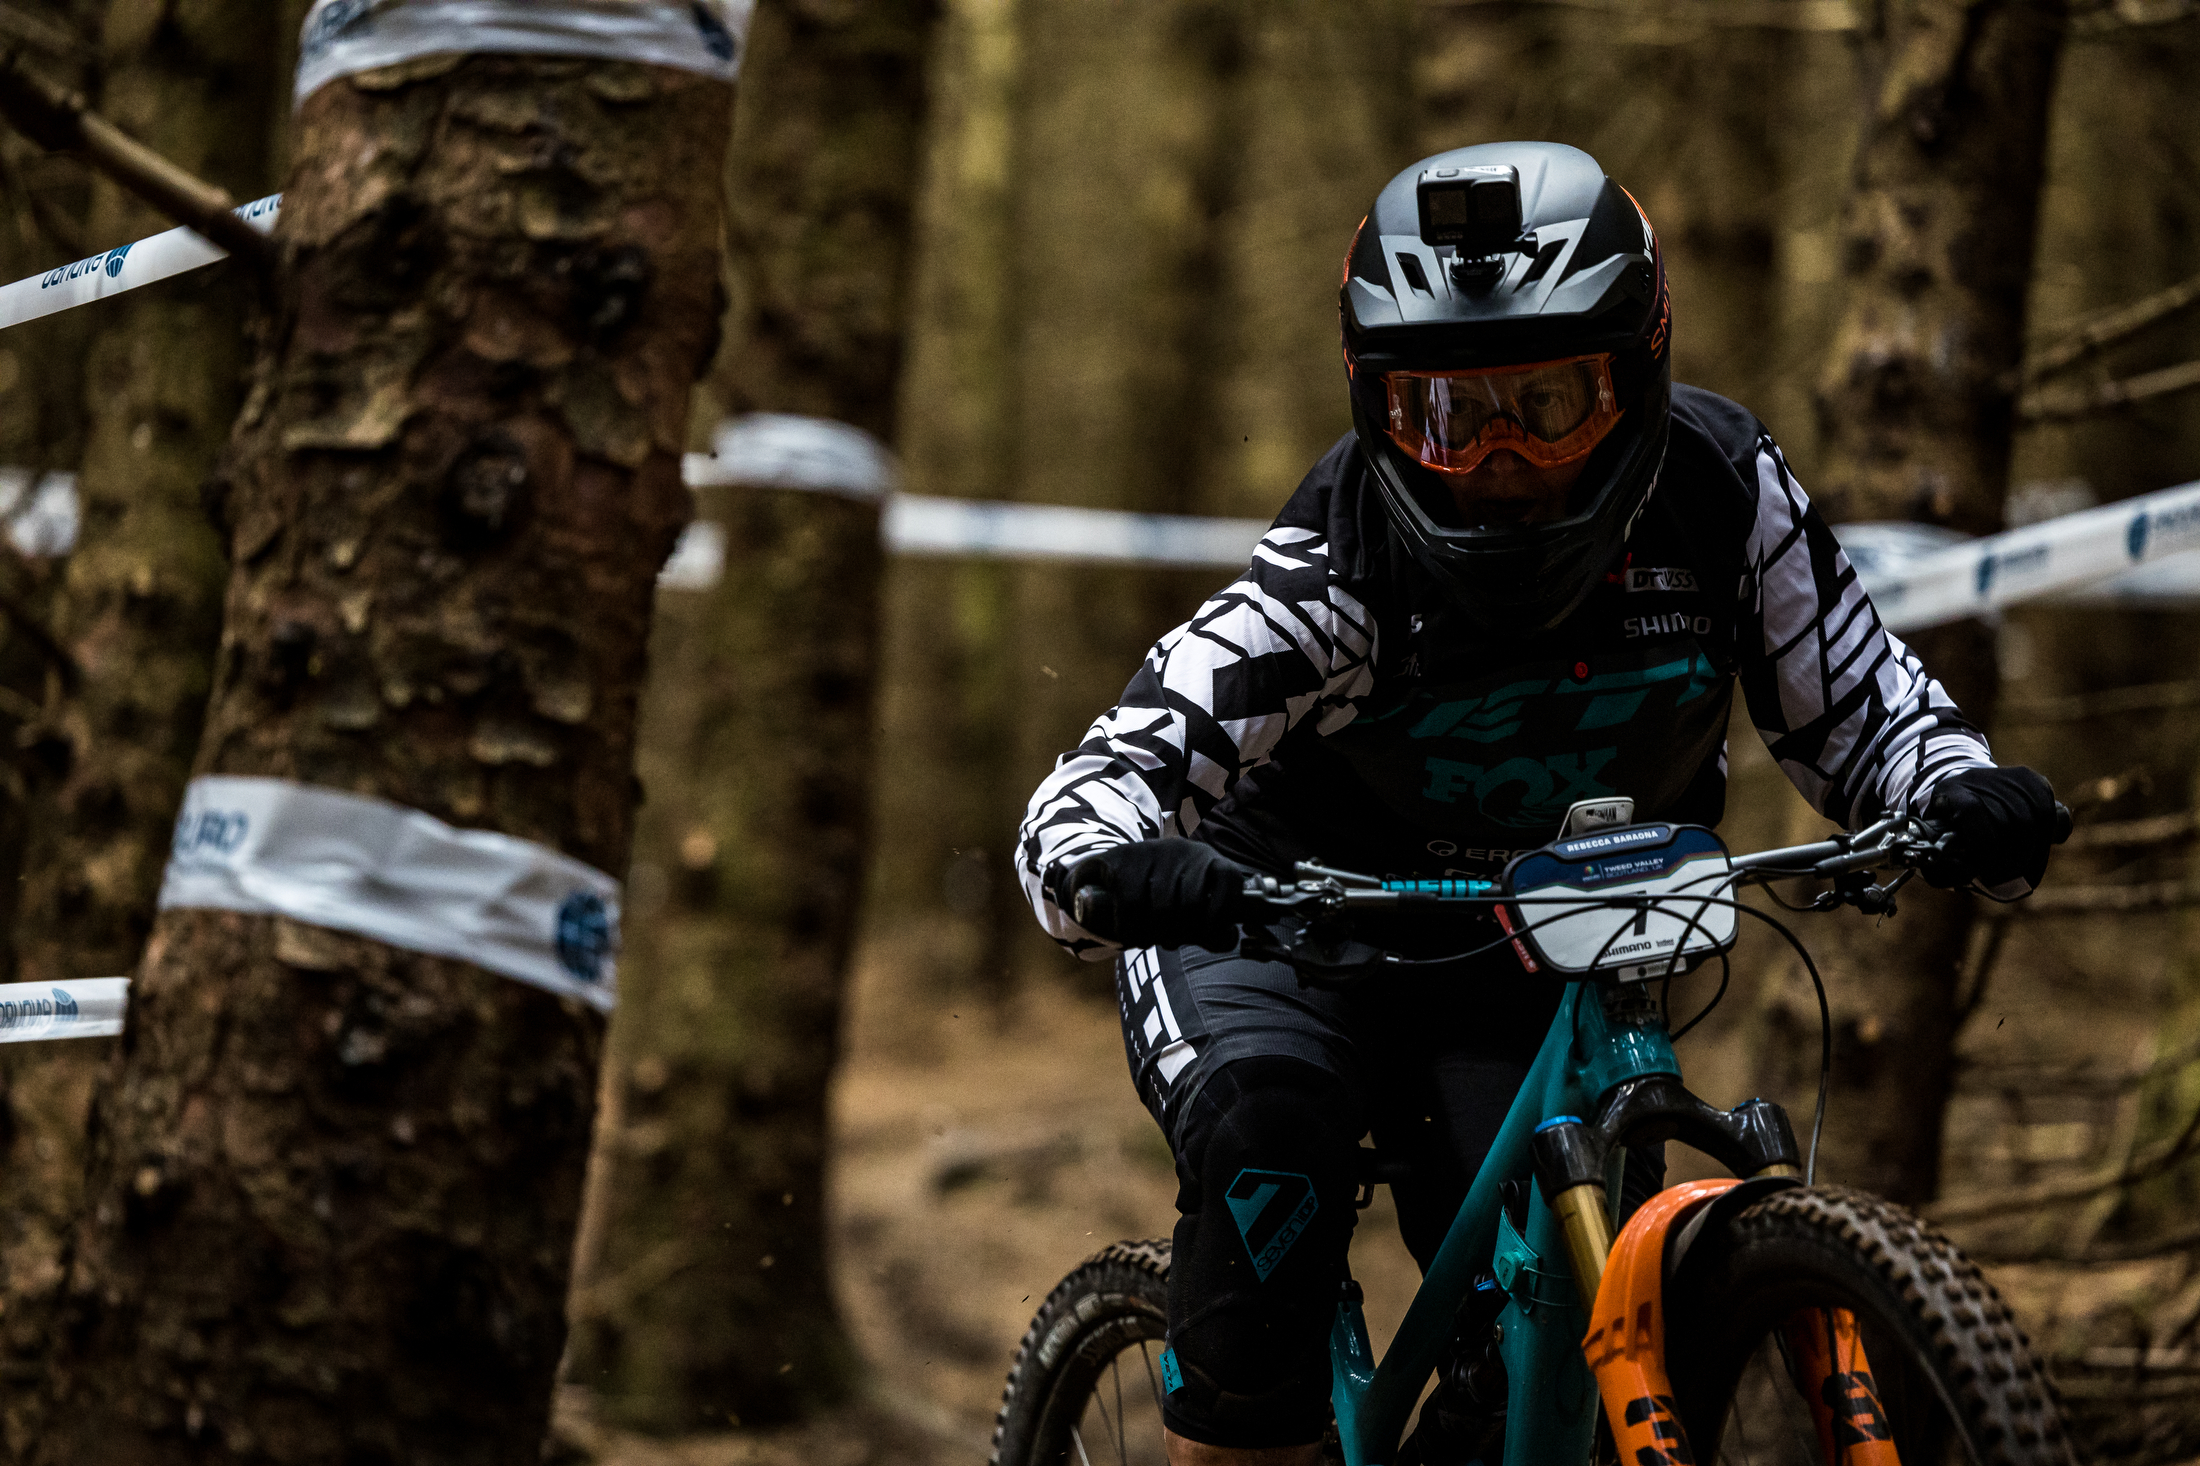 Bex giving it her all at EWS Tweed Valley